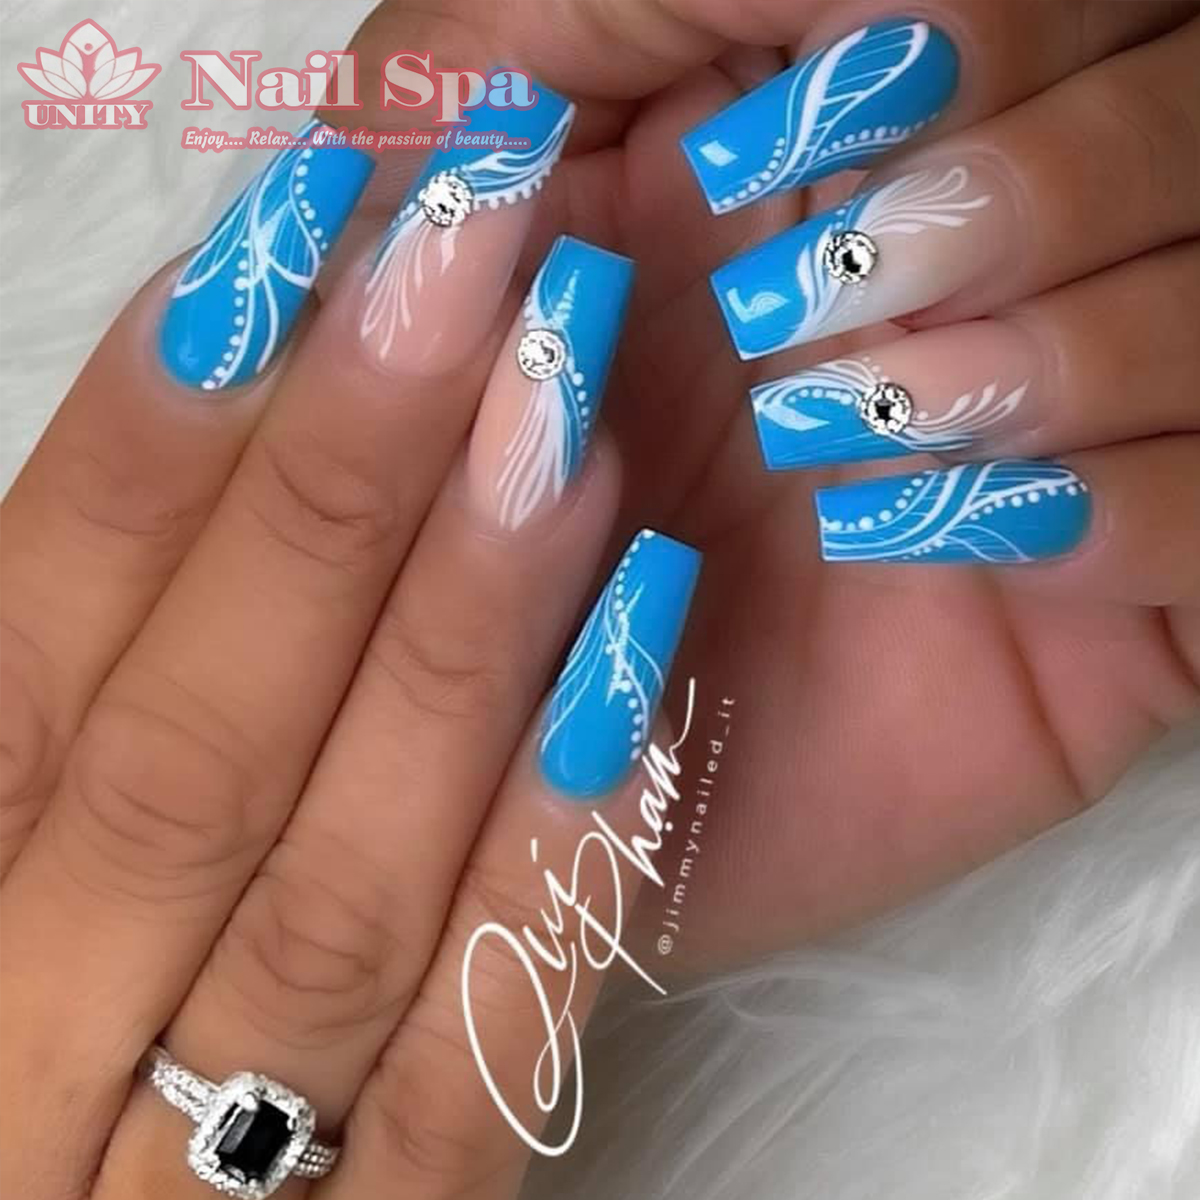 Unity Nail Spa - Nail salon in Clearwater FL 33755